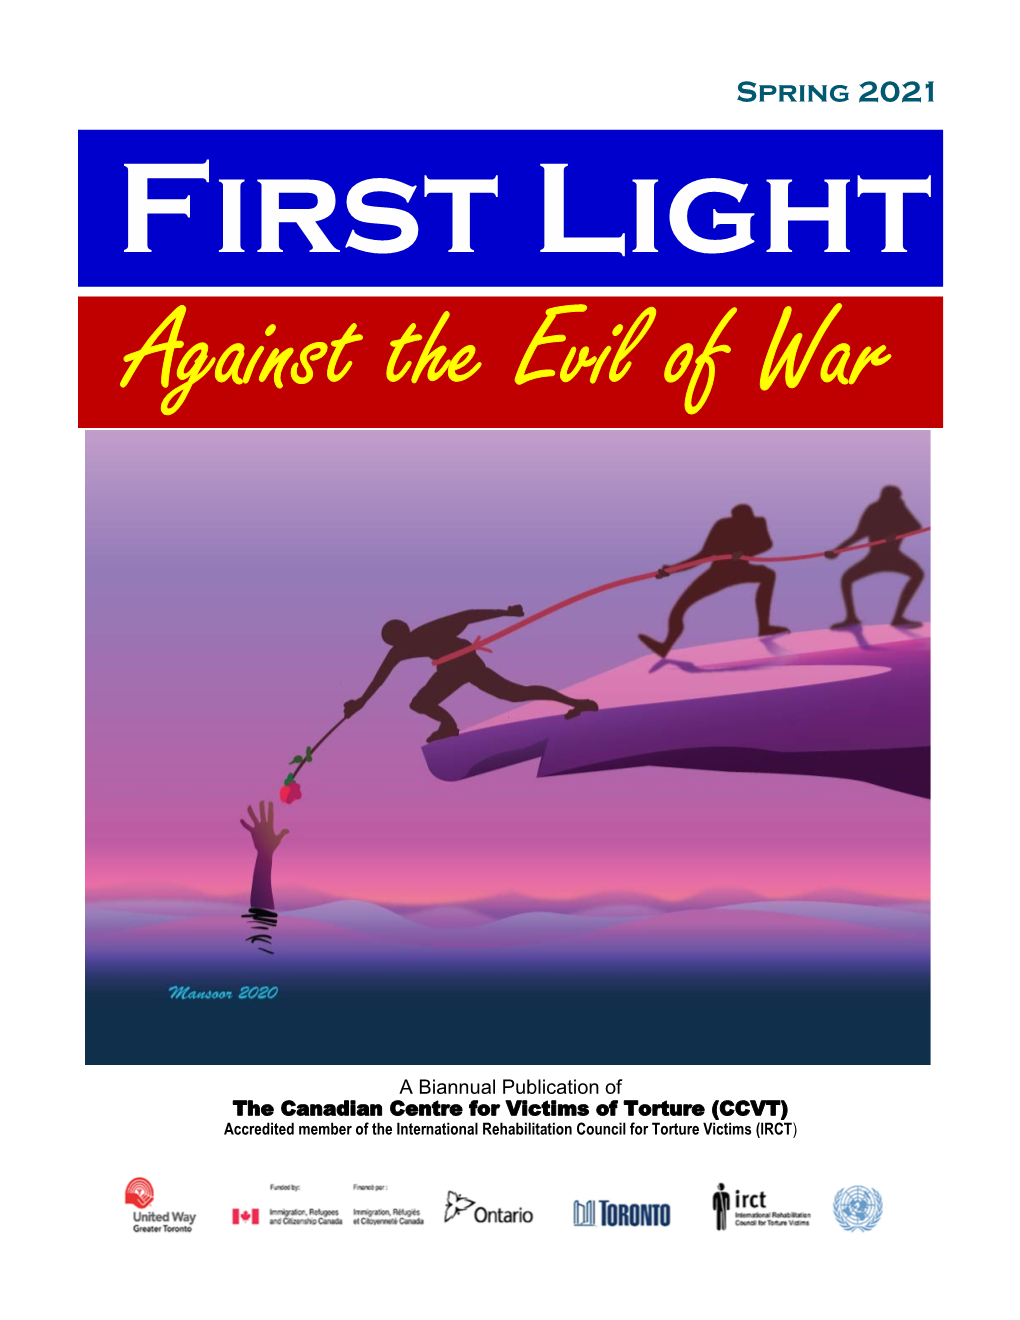 Spring 2021 First Light Against the Evil of War